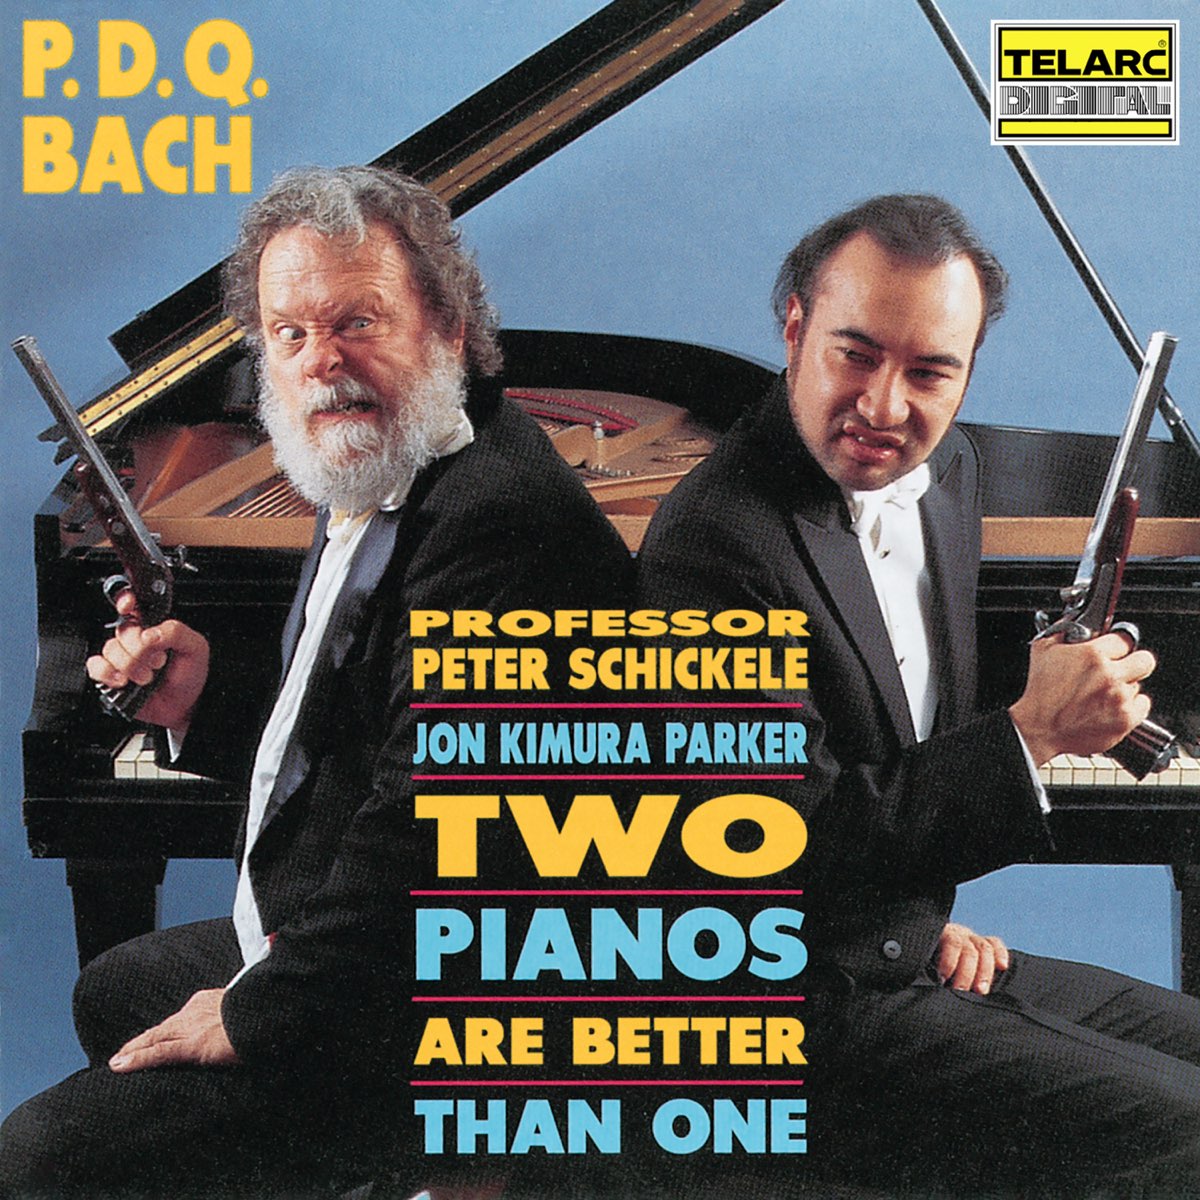 Two pianos. Питер Шикеле.